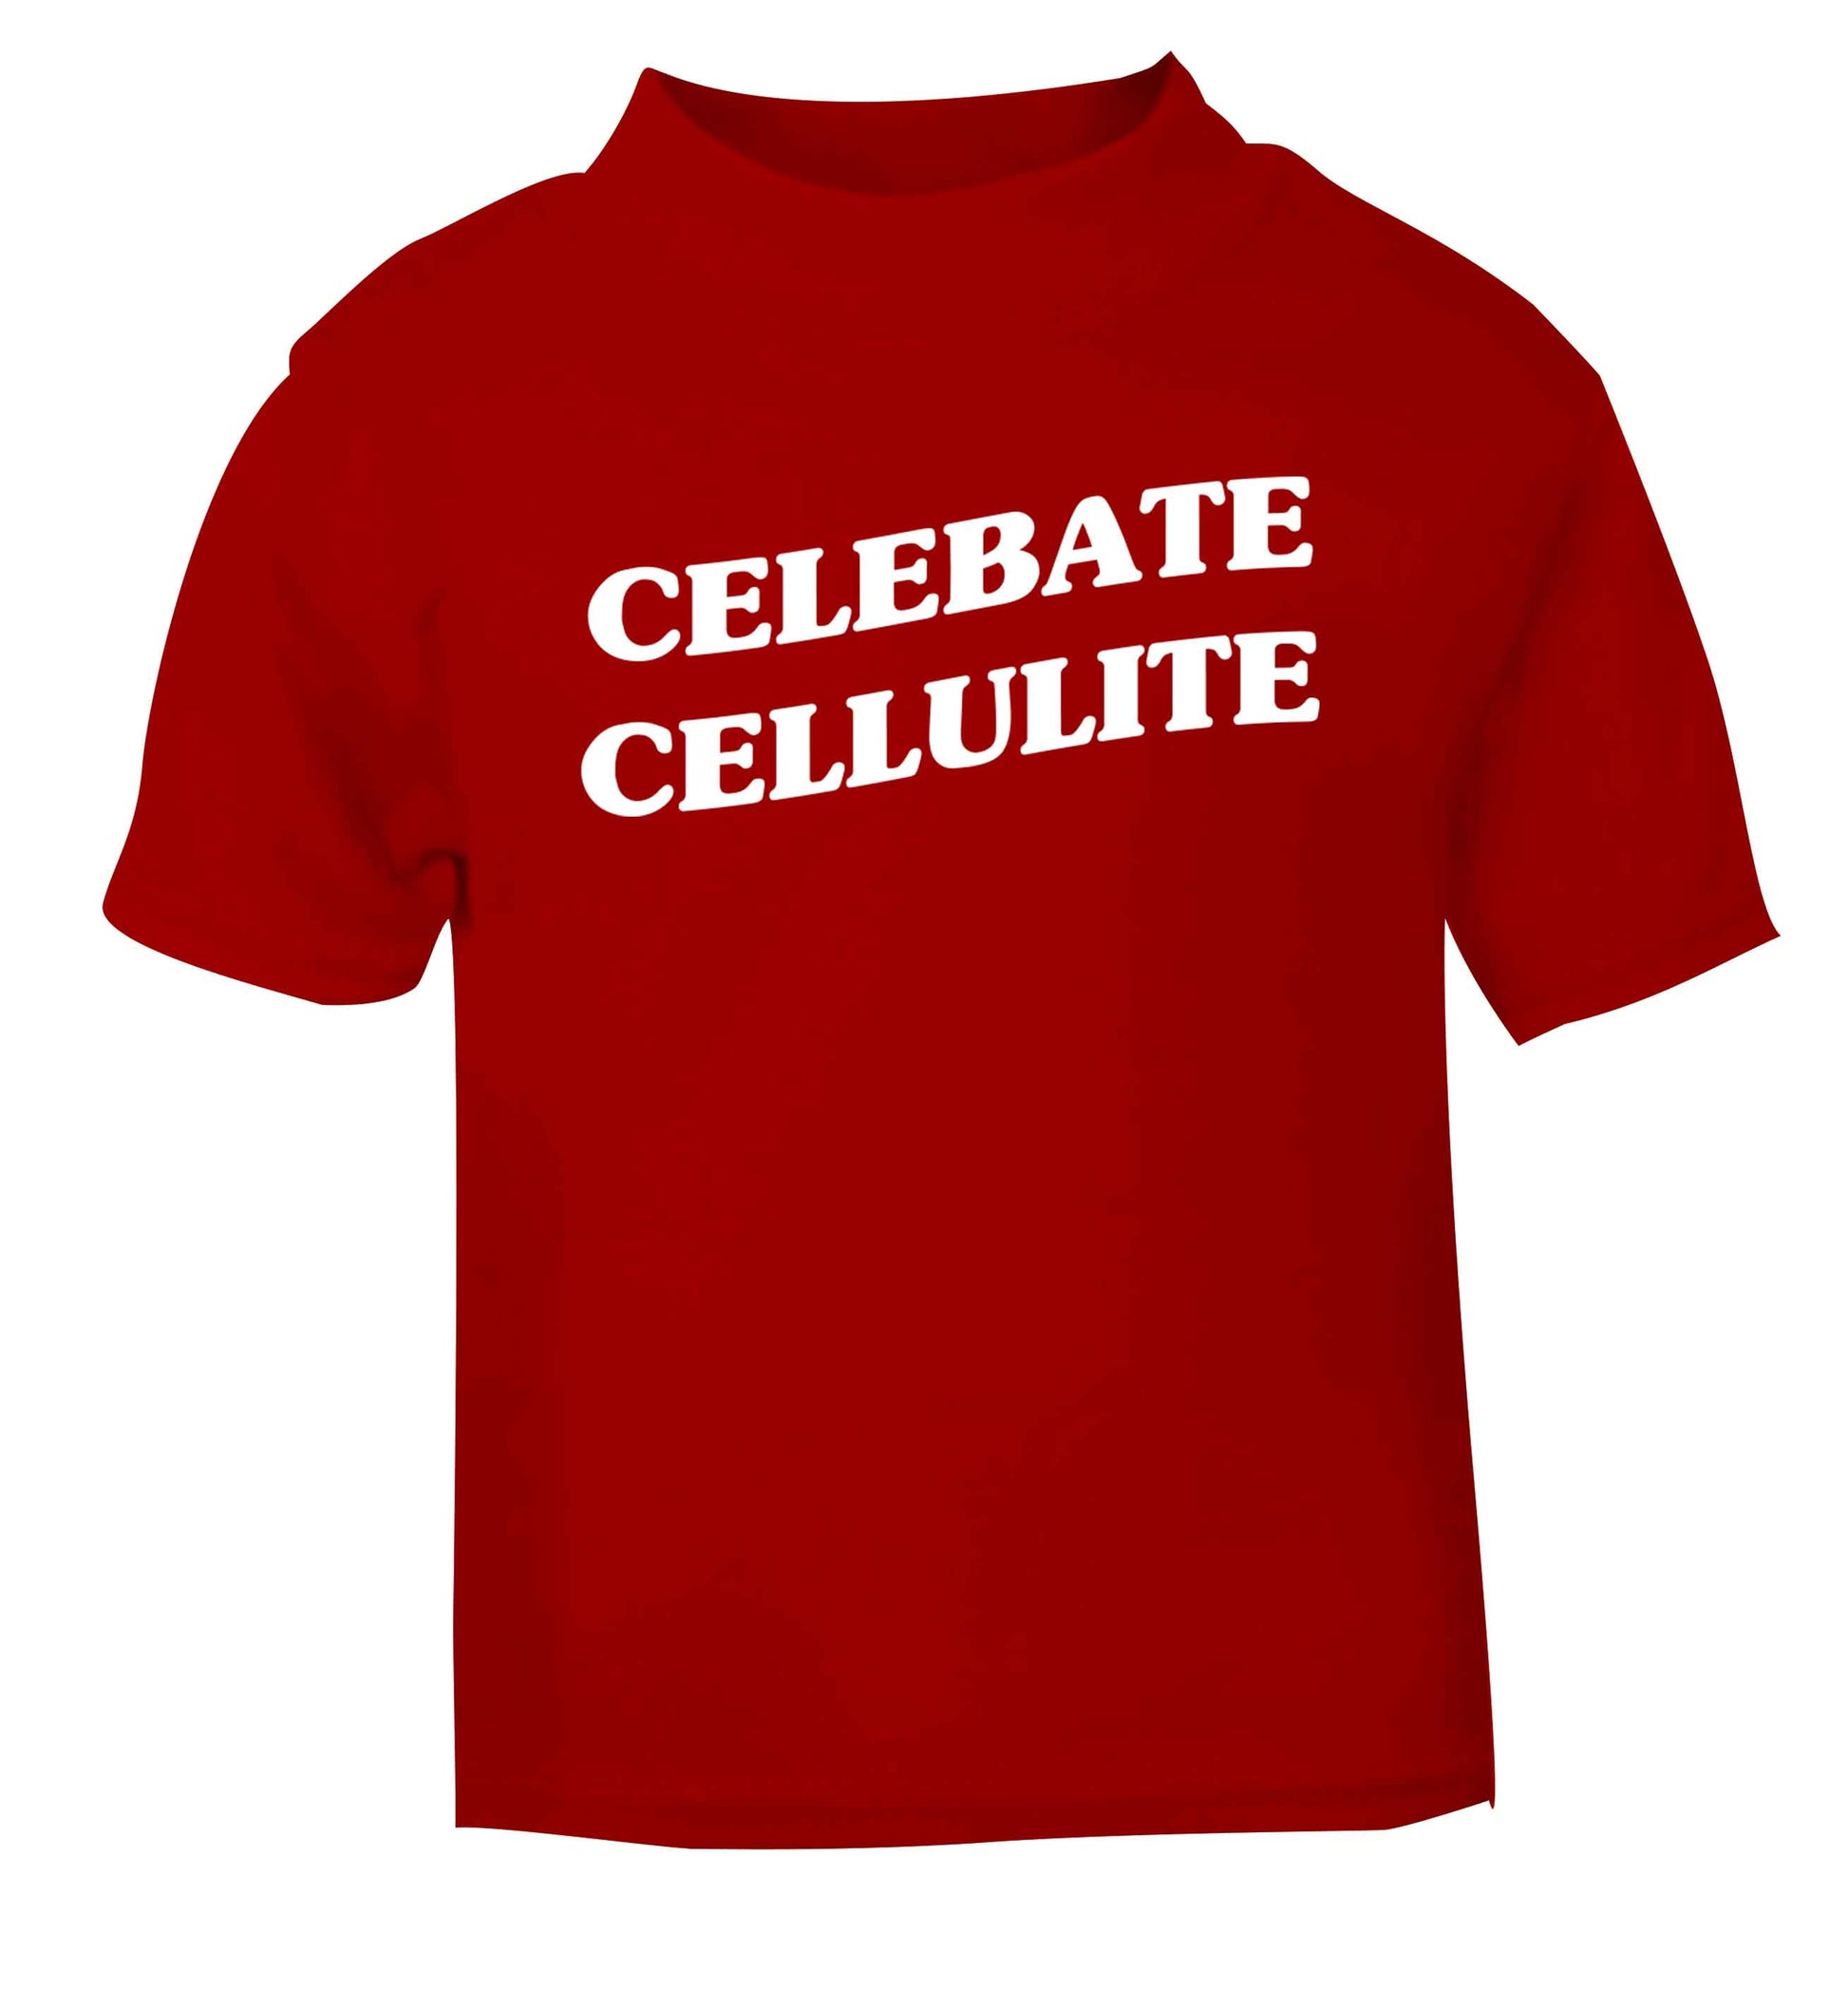 Celebrate cellulite red baby toddler Tshirt 2 Years